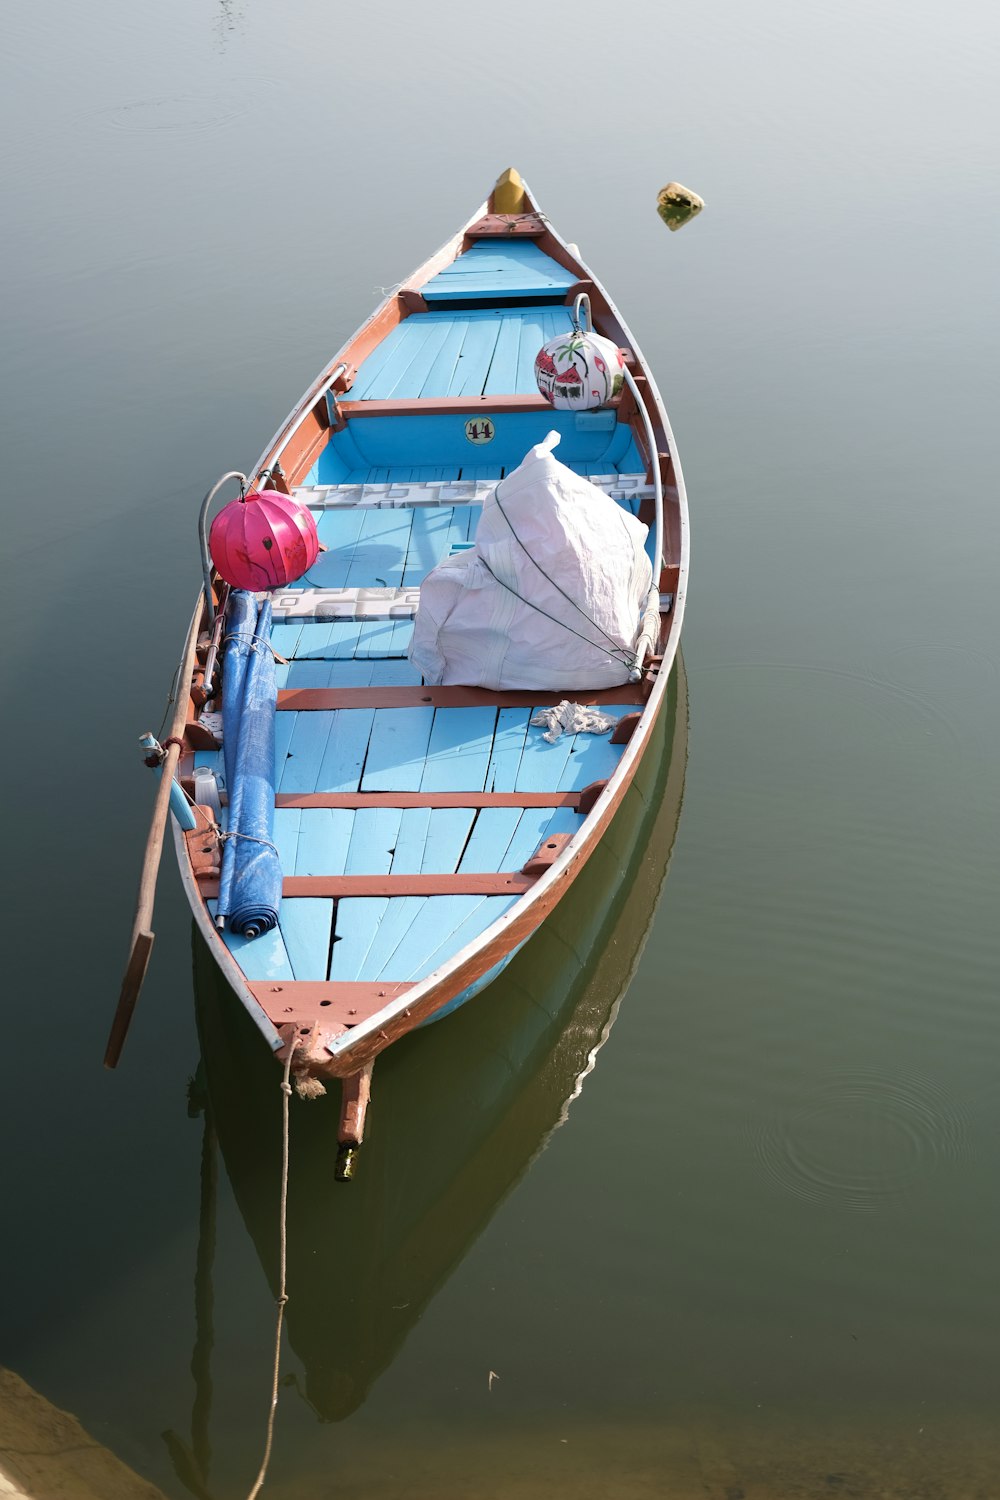 a small blue boat floating on top of a body of water